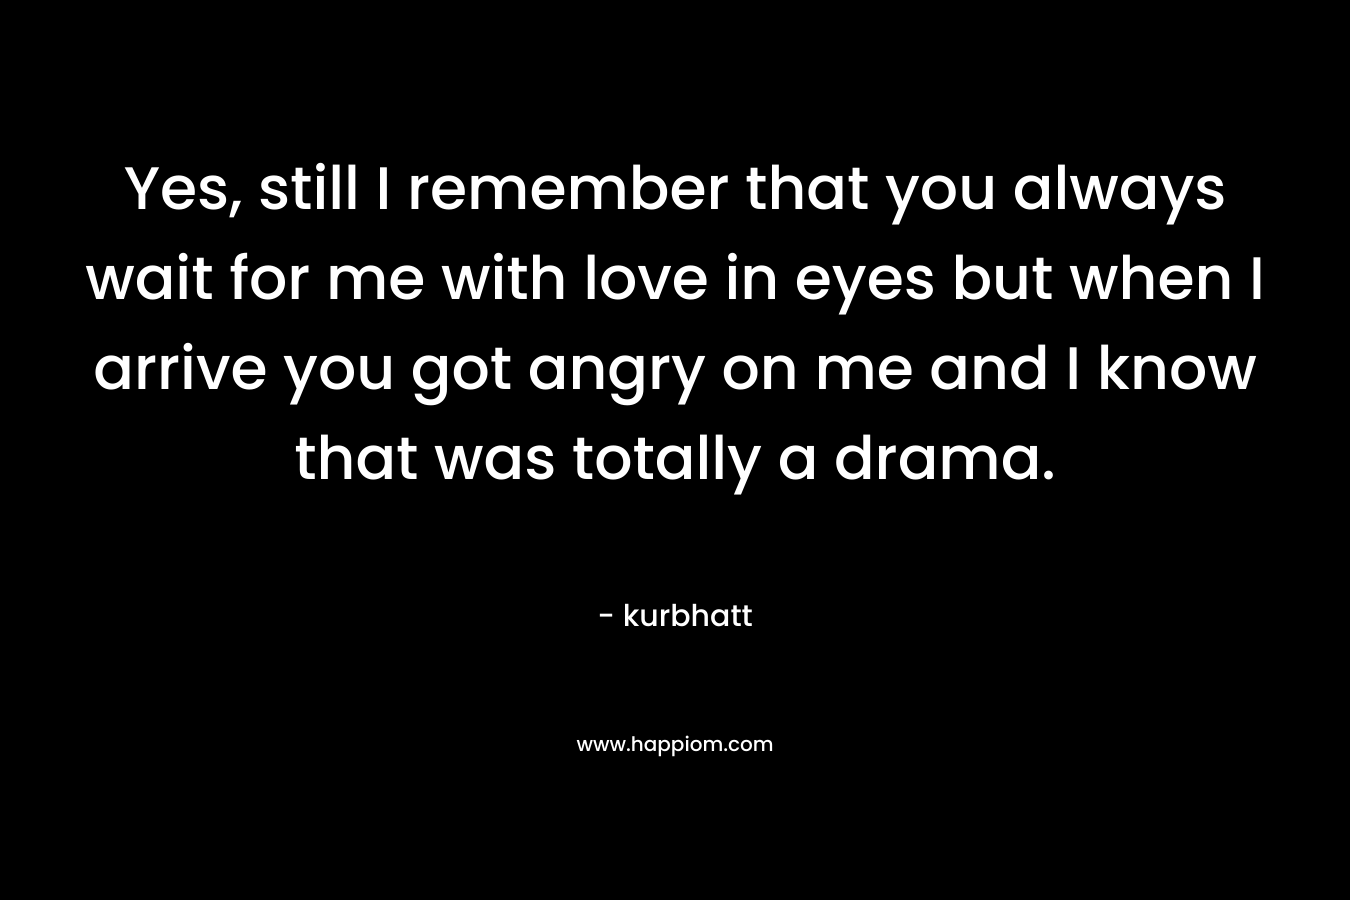 Yes, still I remember that you always wait for me with love in eyes but when I arrive you got angry on me and I know that was totally a drama. – kurbhatt